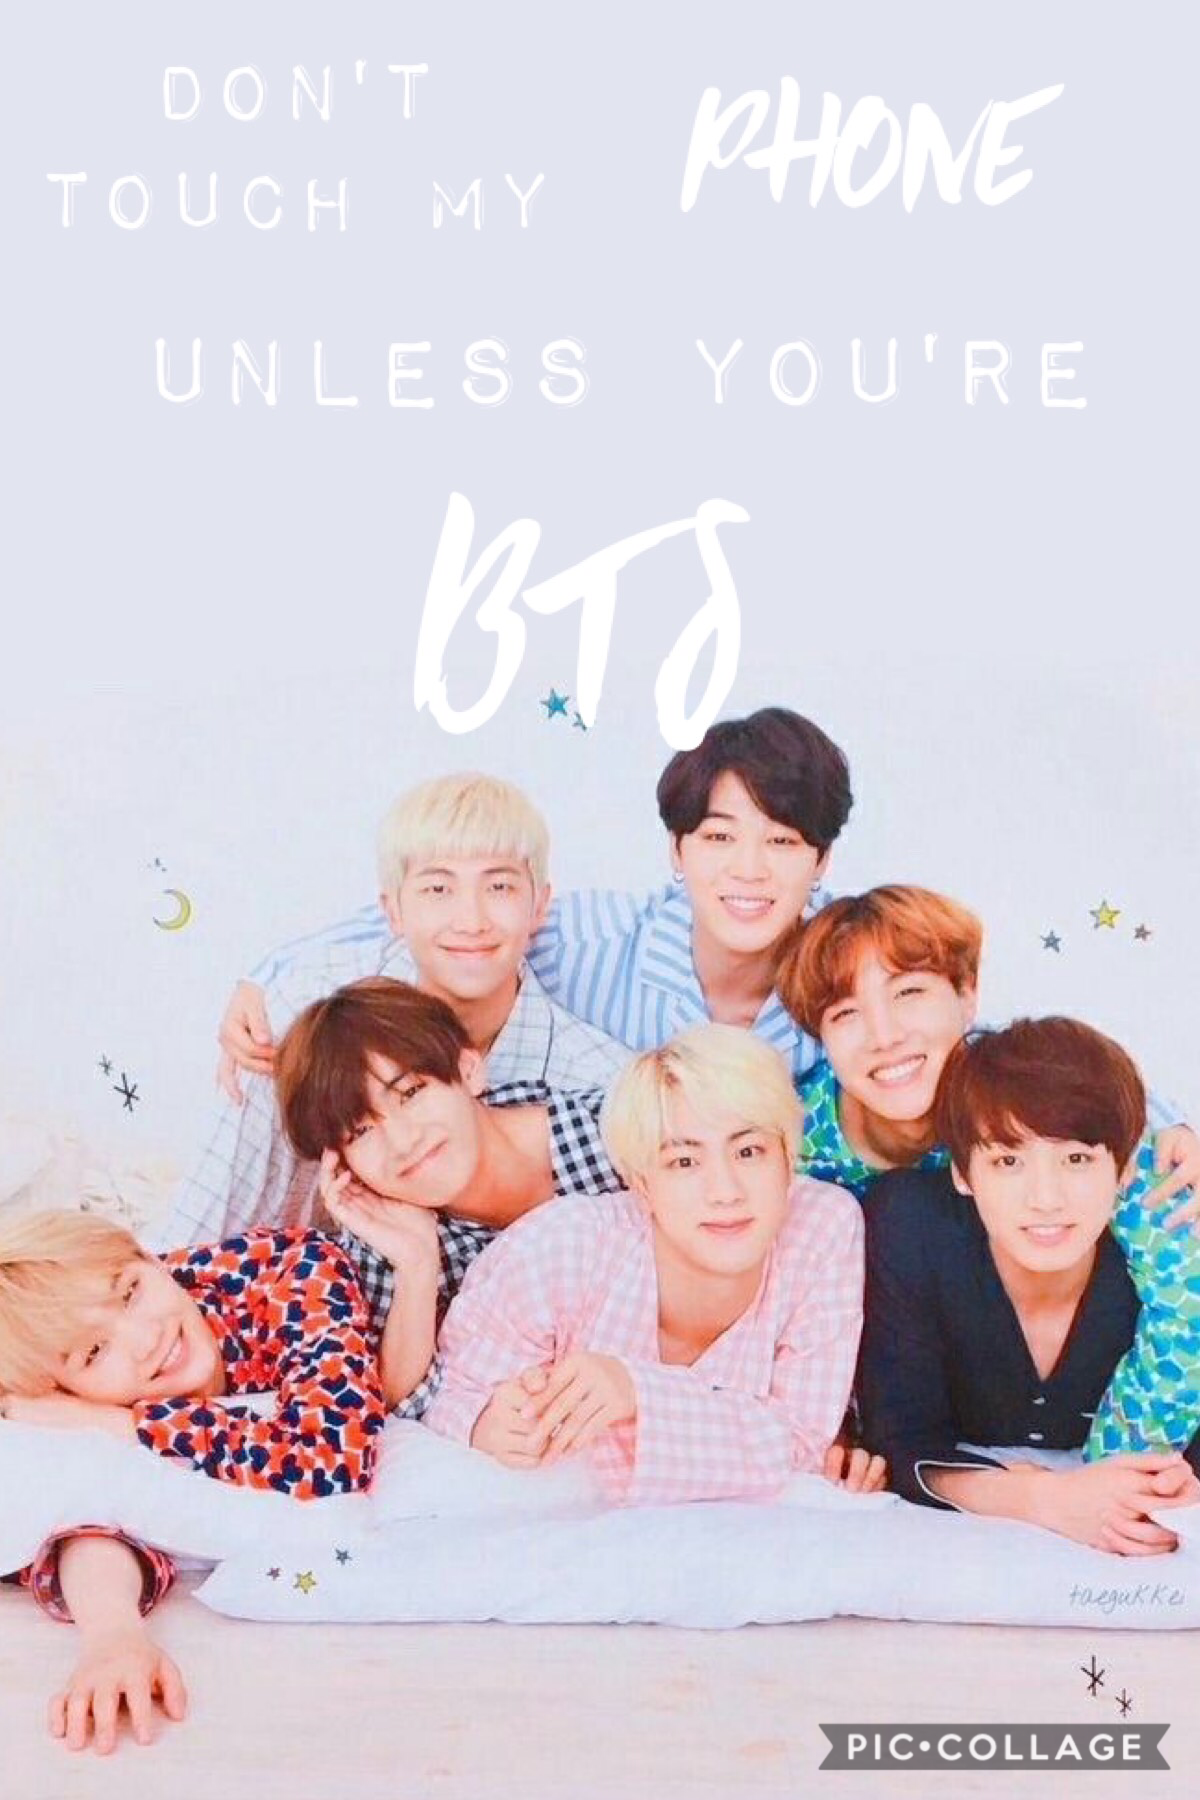 •here's a wallpaper(tap)•

This was inspired by @BtsBiasGirlie so I this is not my original idea